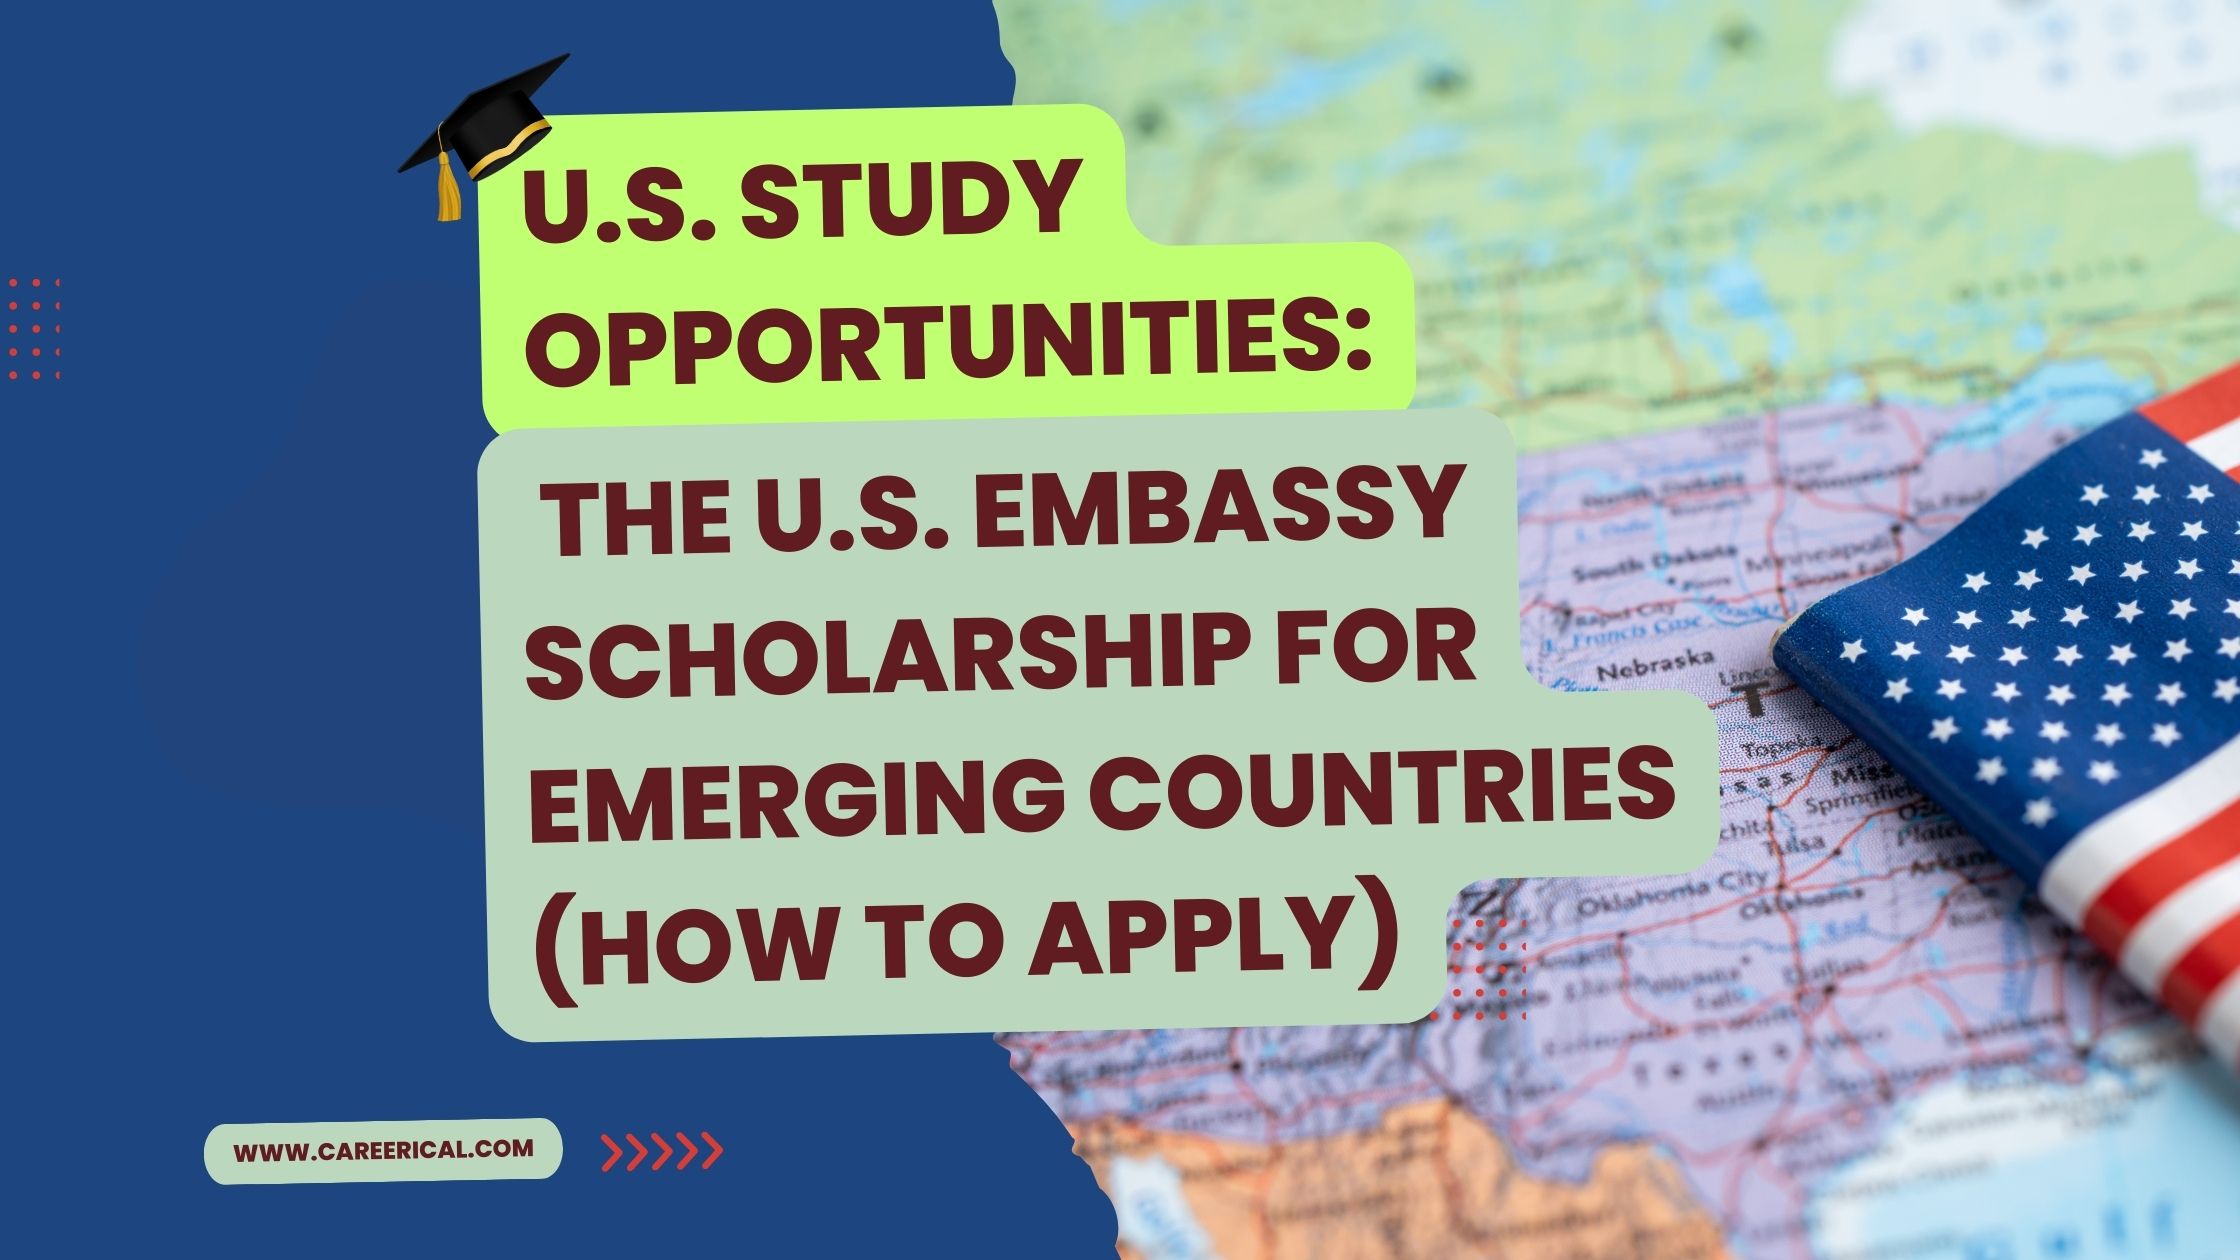 U.S. Study Opportunities: The U.S. Embassy Scholarship for Emerging Countries (How to Apply)